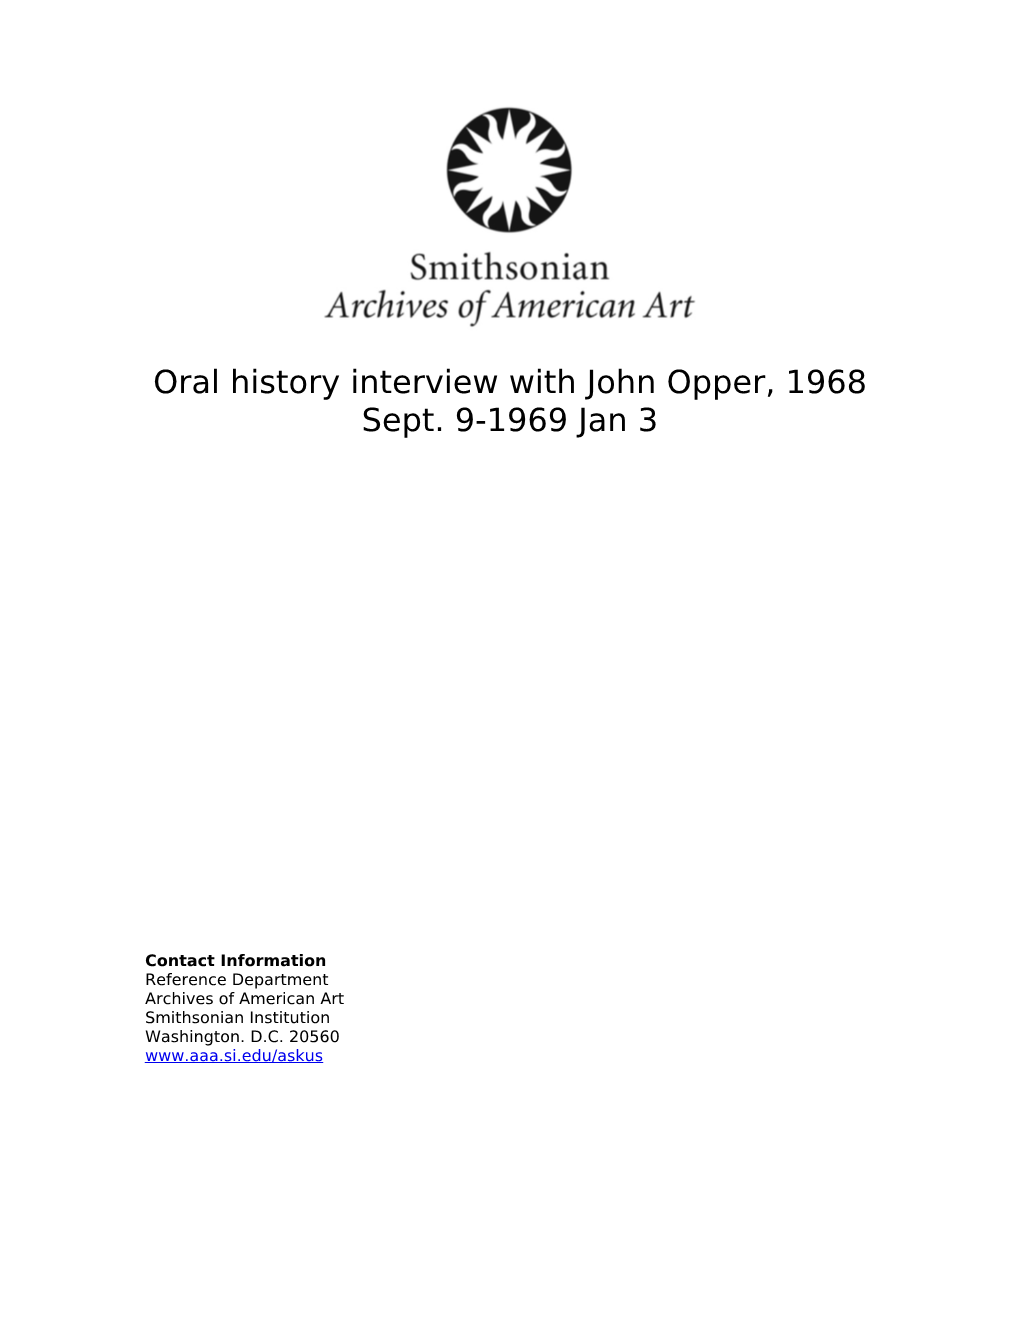 Oral History Interview with John Opper, 1968 Sept. 9-1969 Jan 3